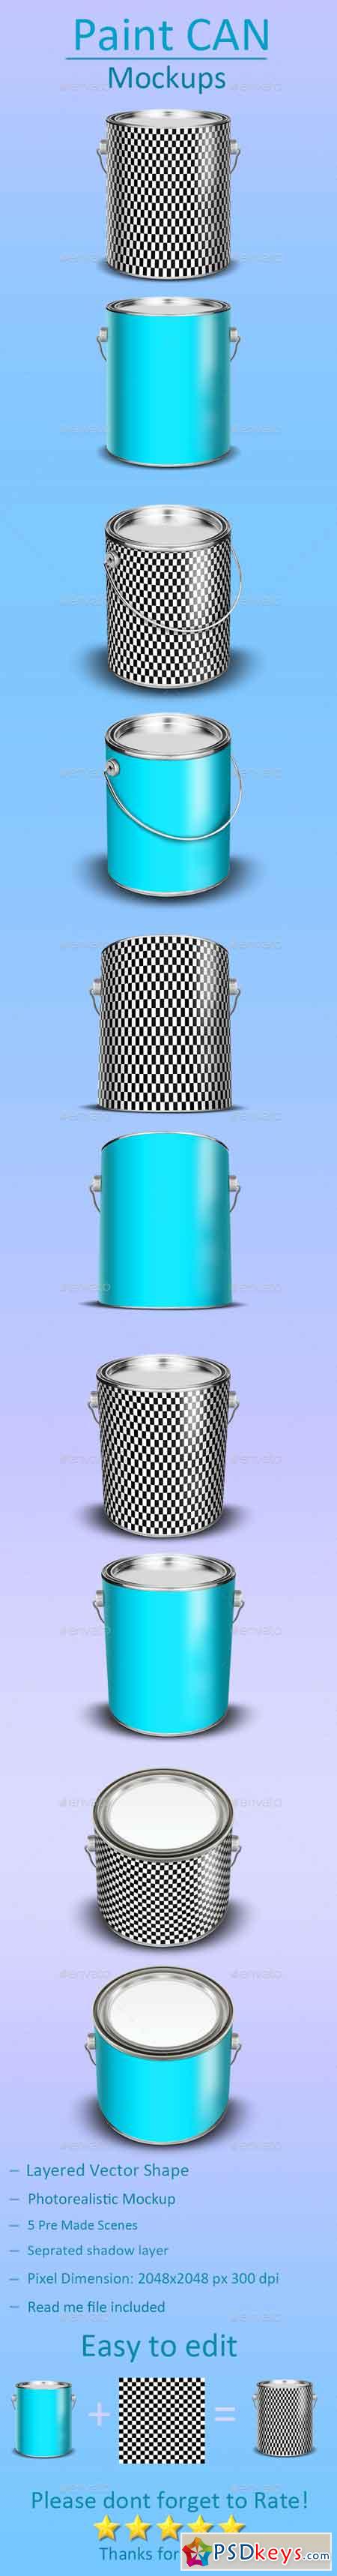 Download Paint Can Mockup 18536563 » Free Download Photoshop Vector Stock image Via Torrent Zippyshare ...